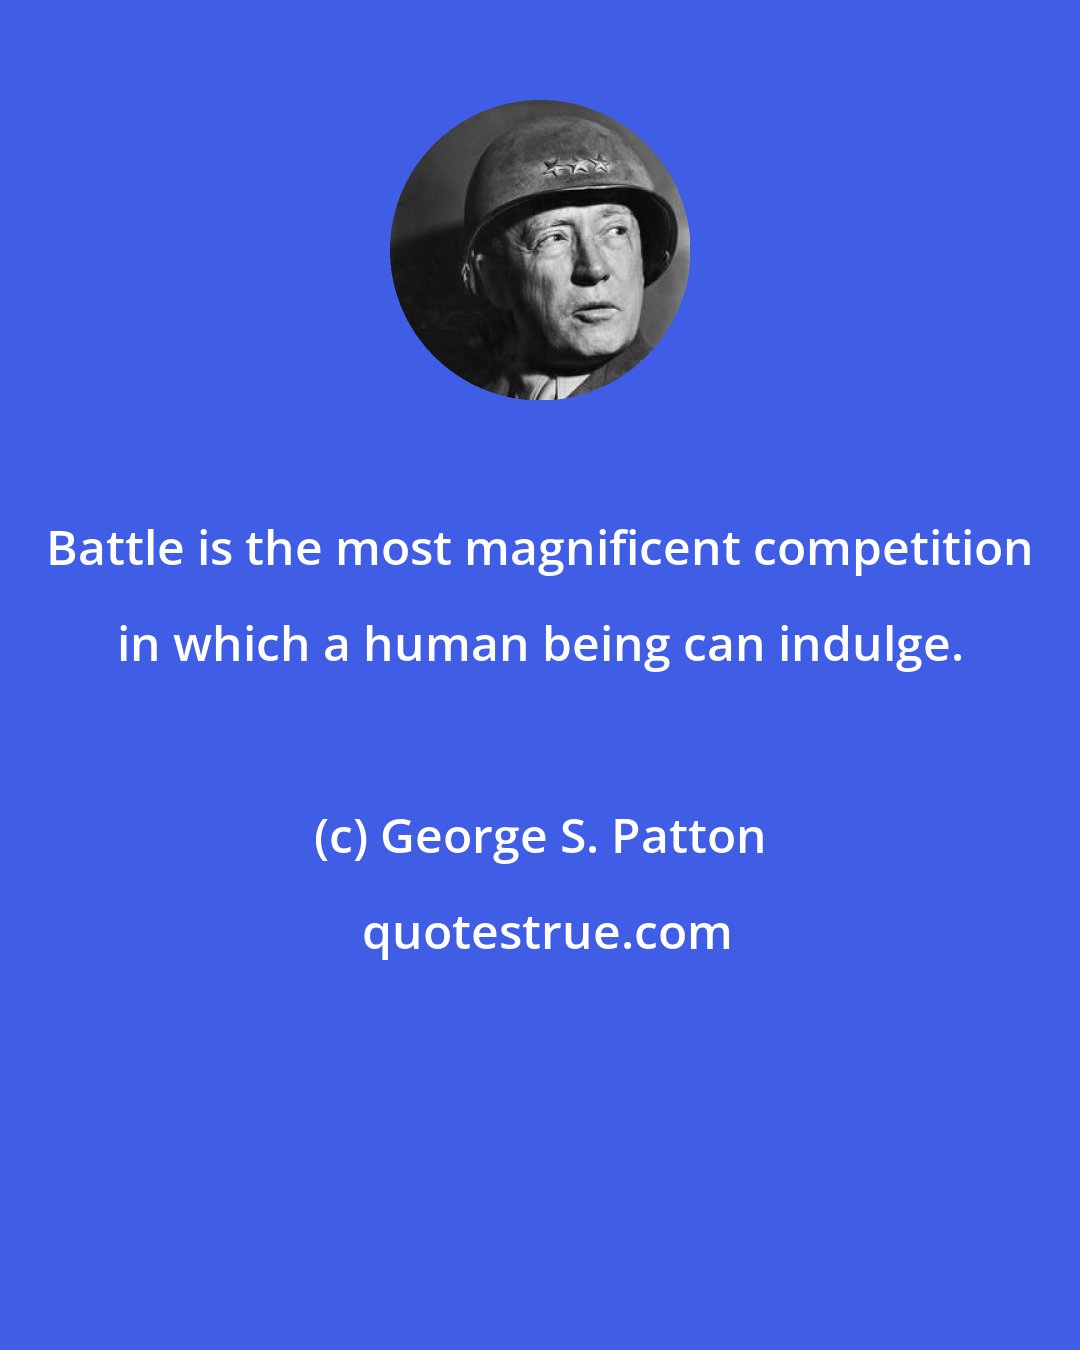 George S. Patton: Battle is the most magnificent competition in which a human being can indulge.